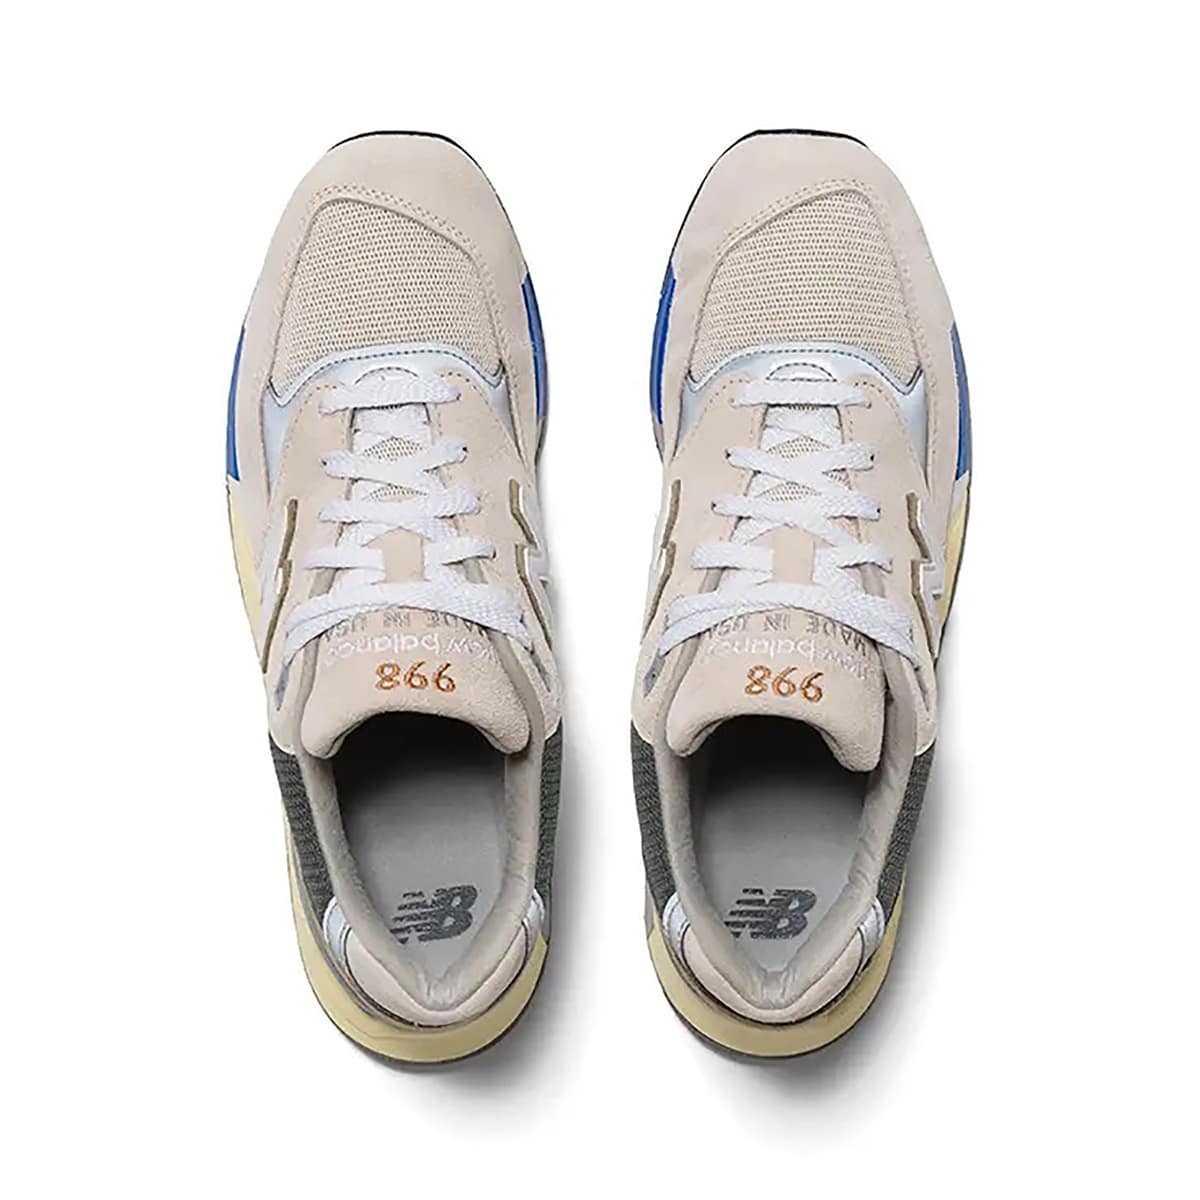 Concepts x New Balance 998 C-Note MADE in USA 10th Anniversary 8